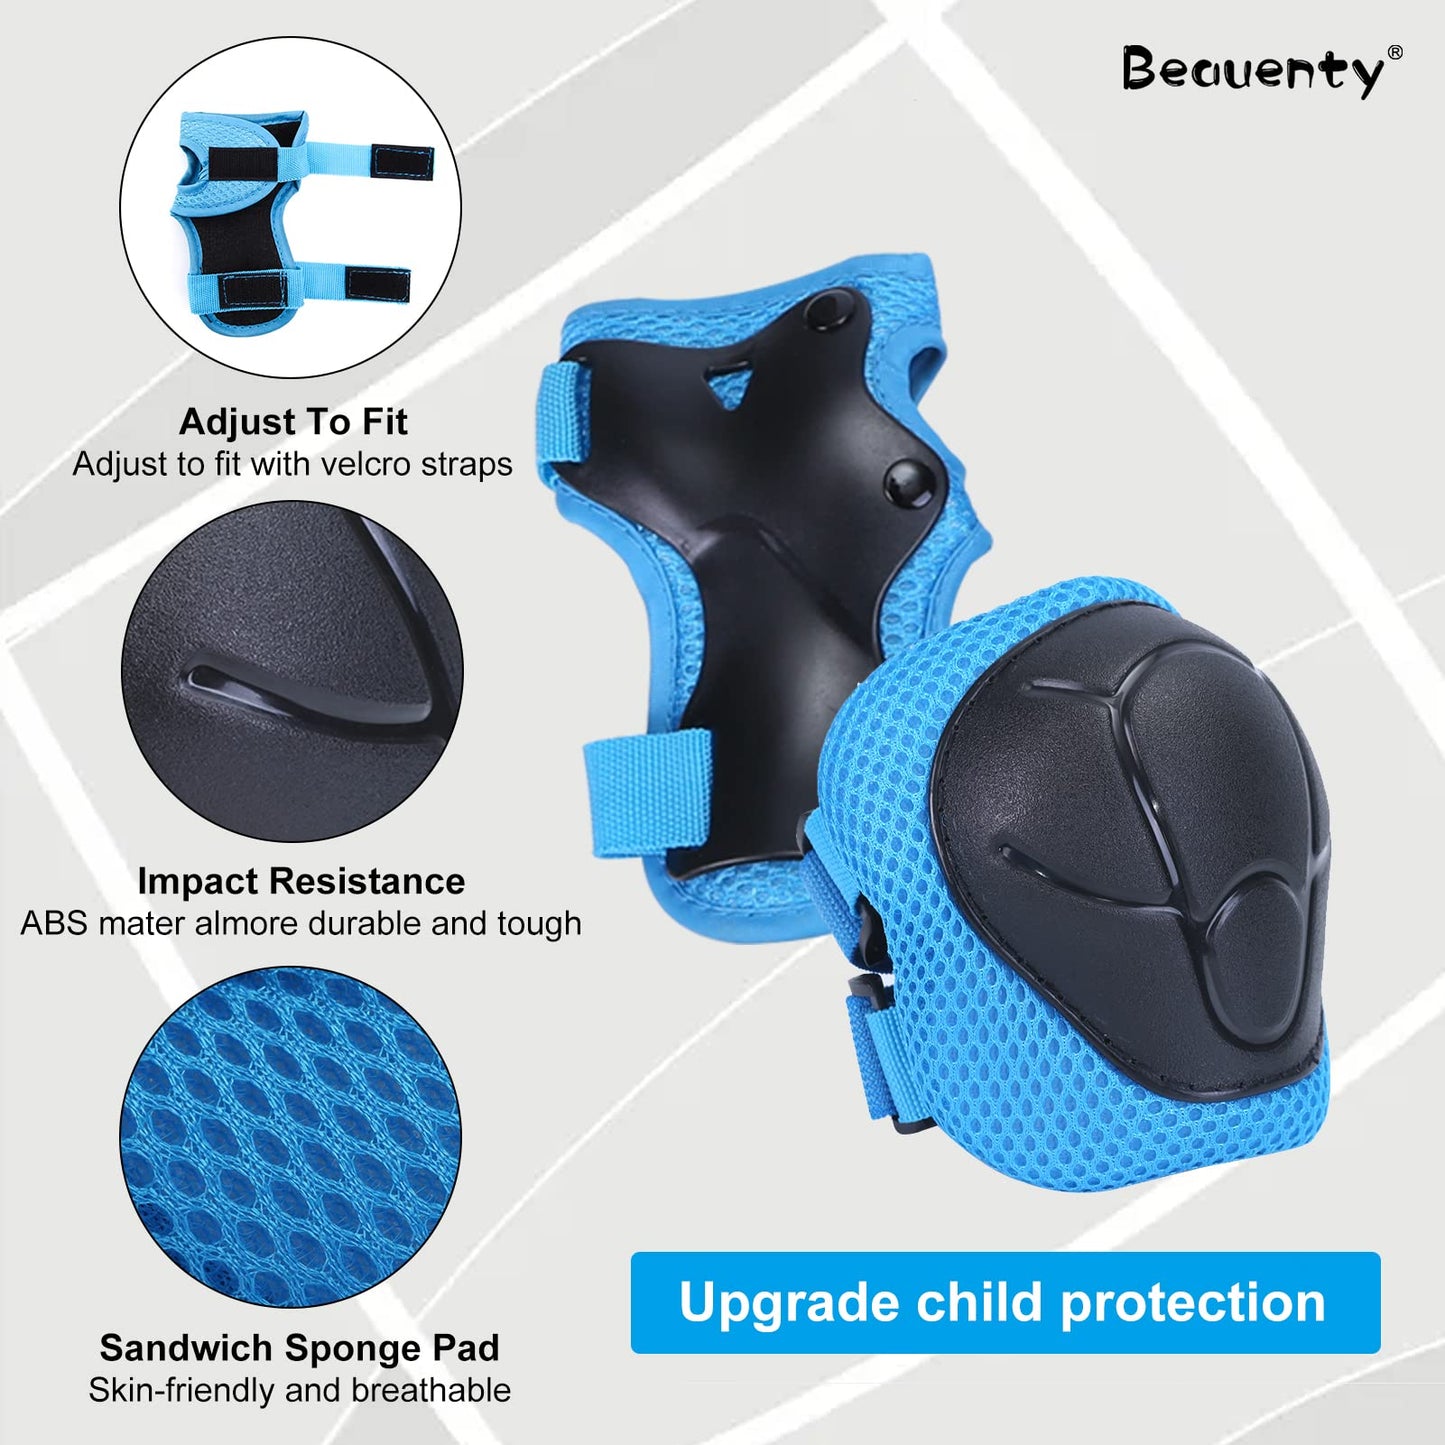 Beauenty Kids Protective Gear Set,Adjustable Kids Knee Pads Elbow Pads Wrist Guards for Skating Cycling Bike Rollerblading Scooter